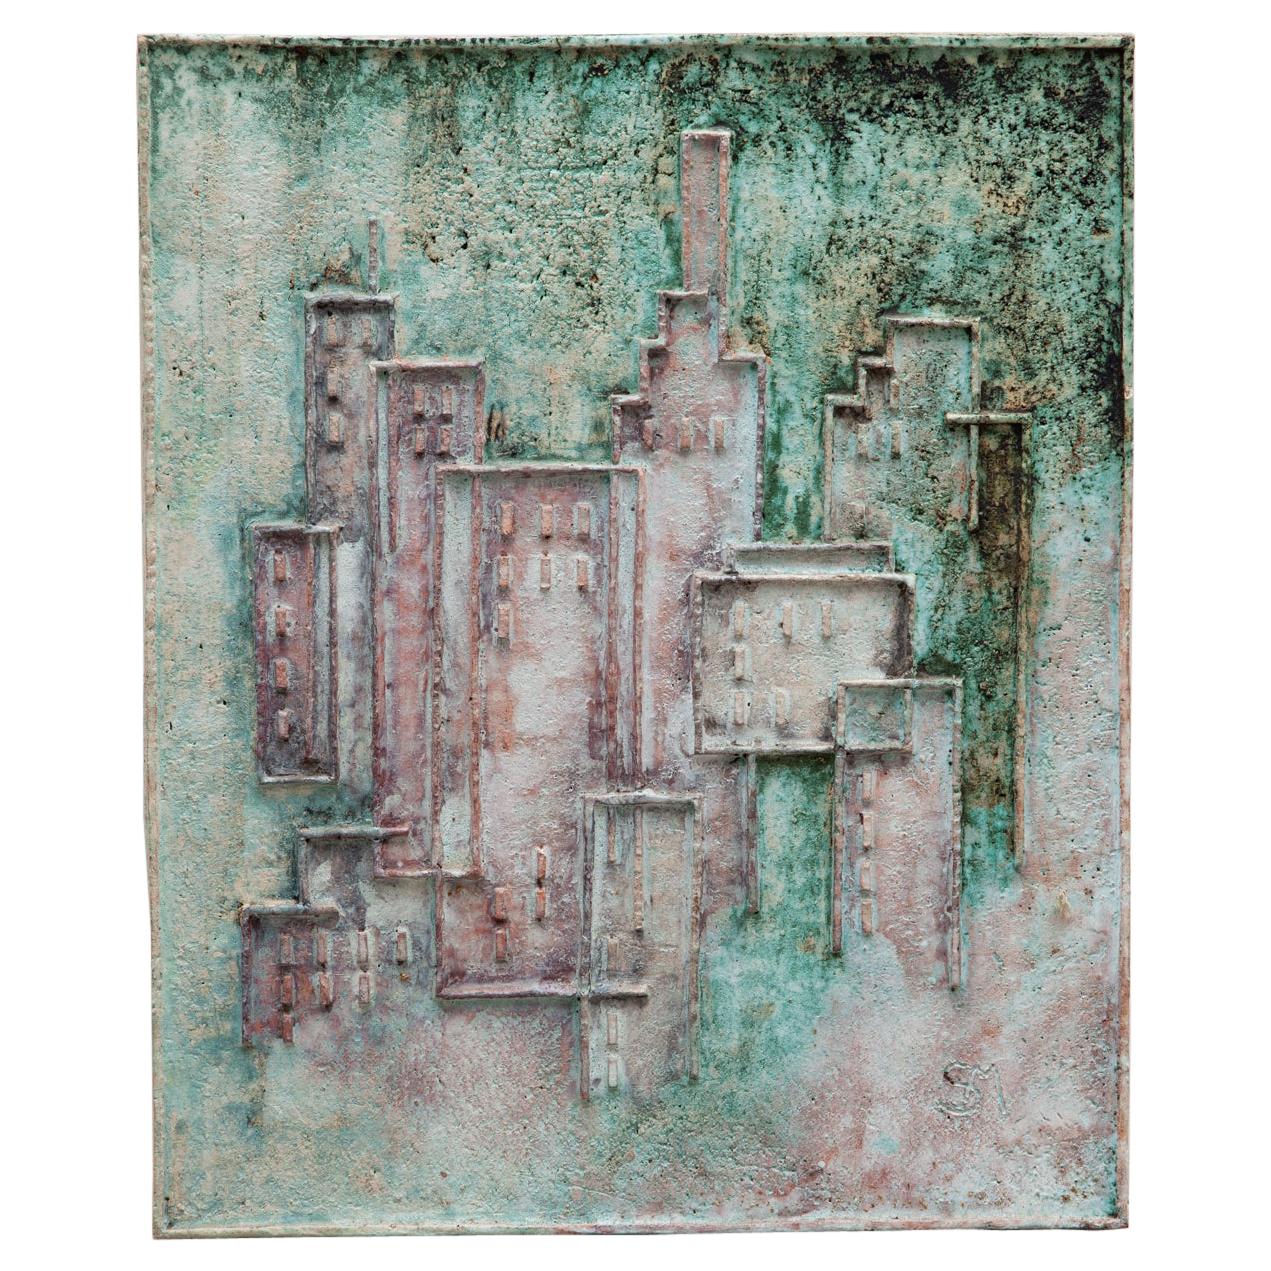 Abstract Cityscape Ceramic Relief in Green Tones, 1970s For Sale